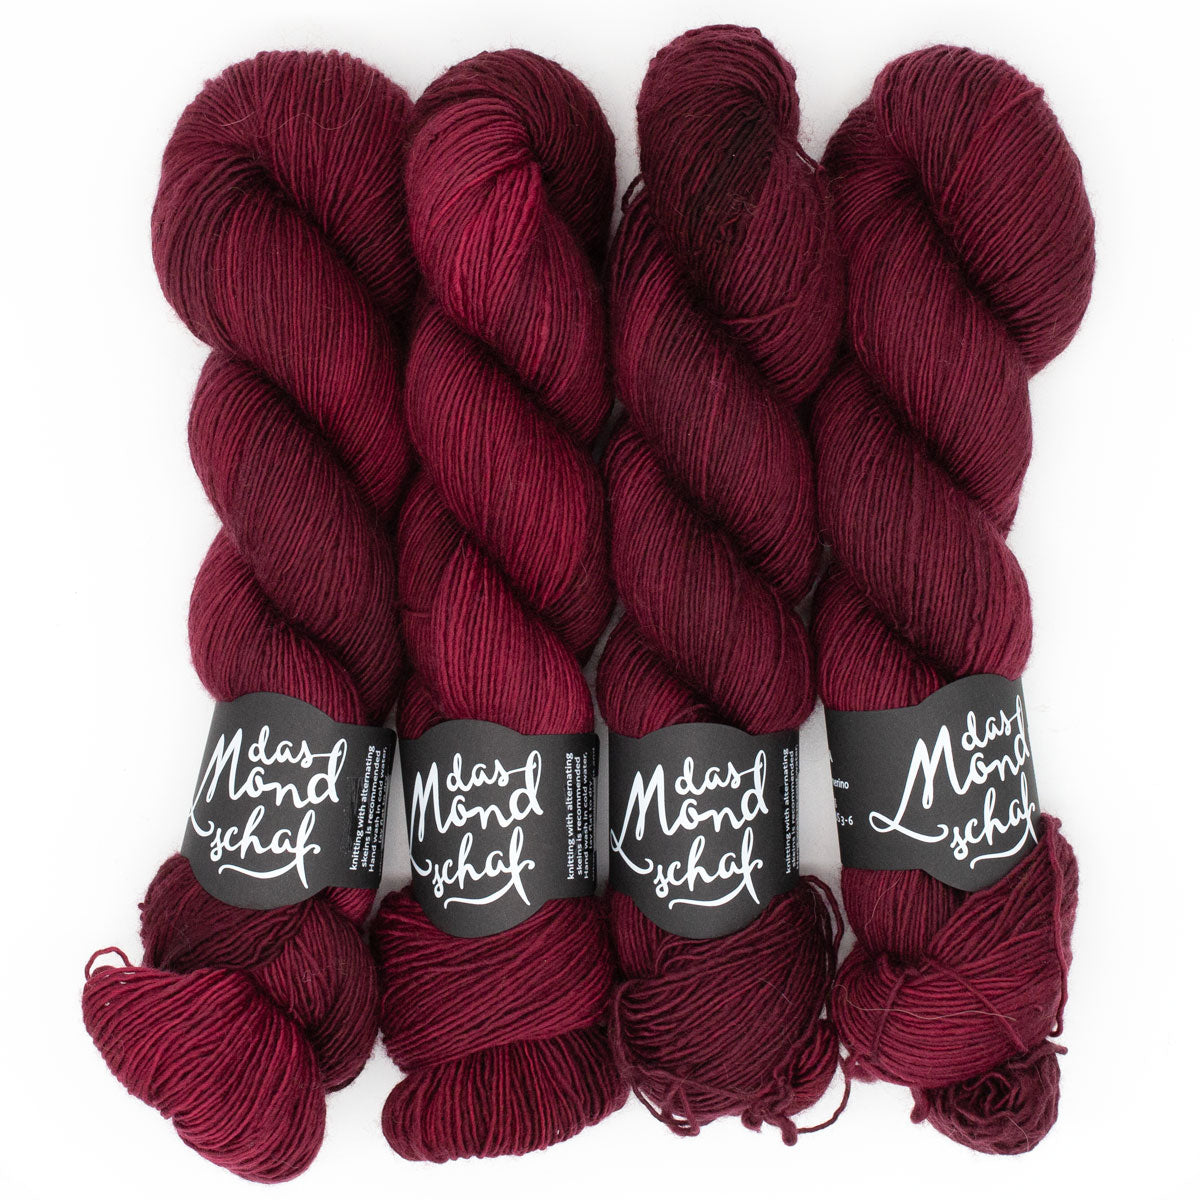 FIRE AND BLOOD - 100g Merino Singles